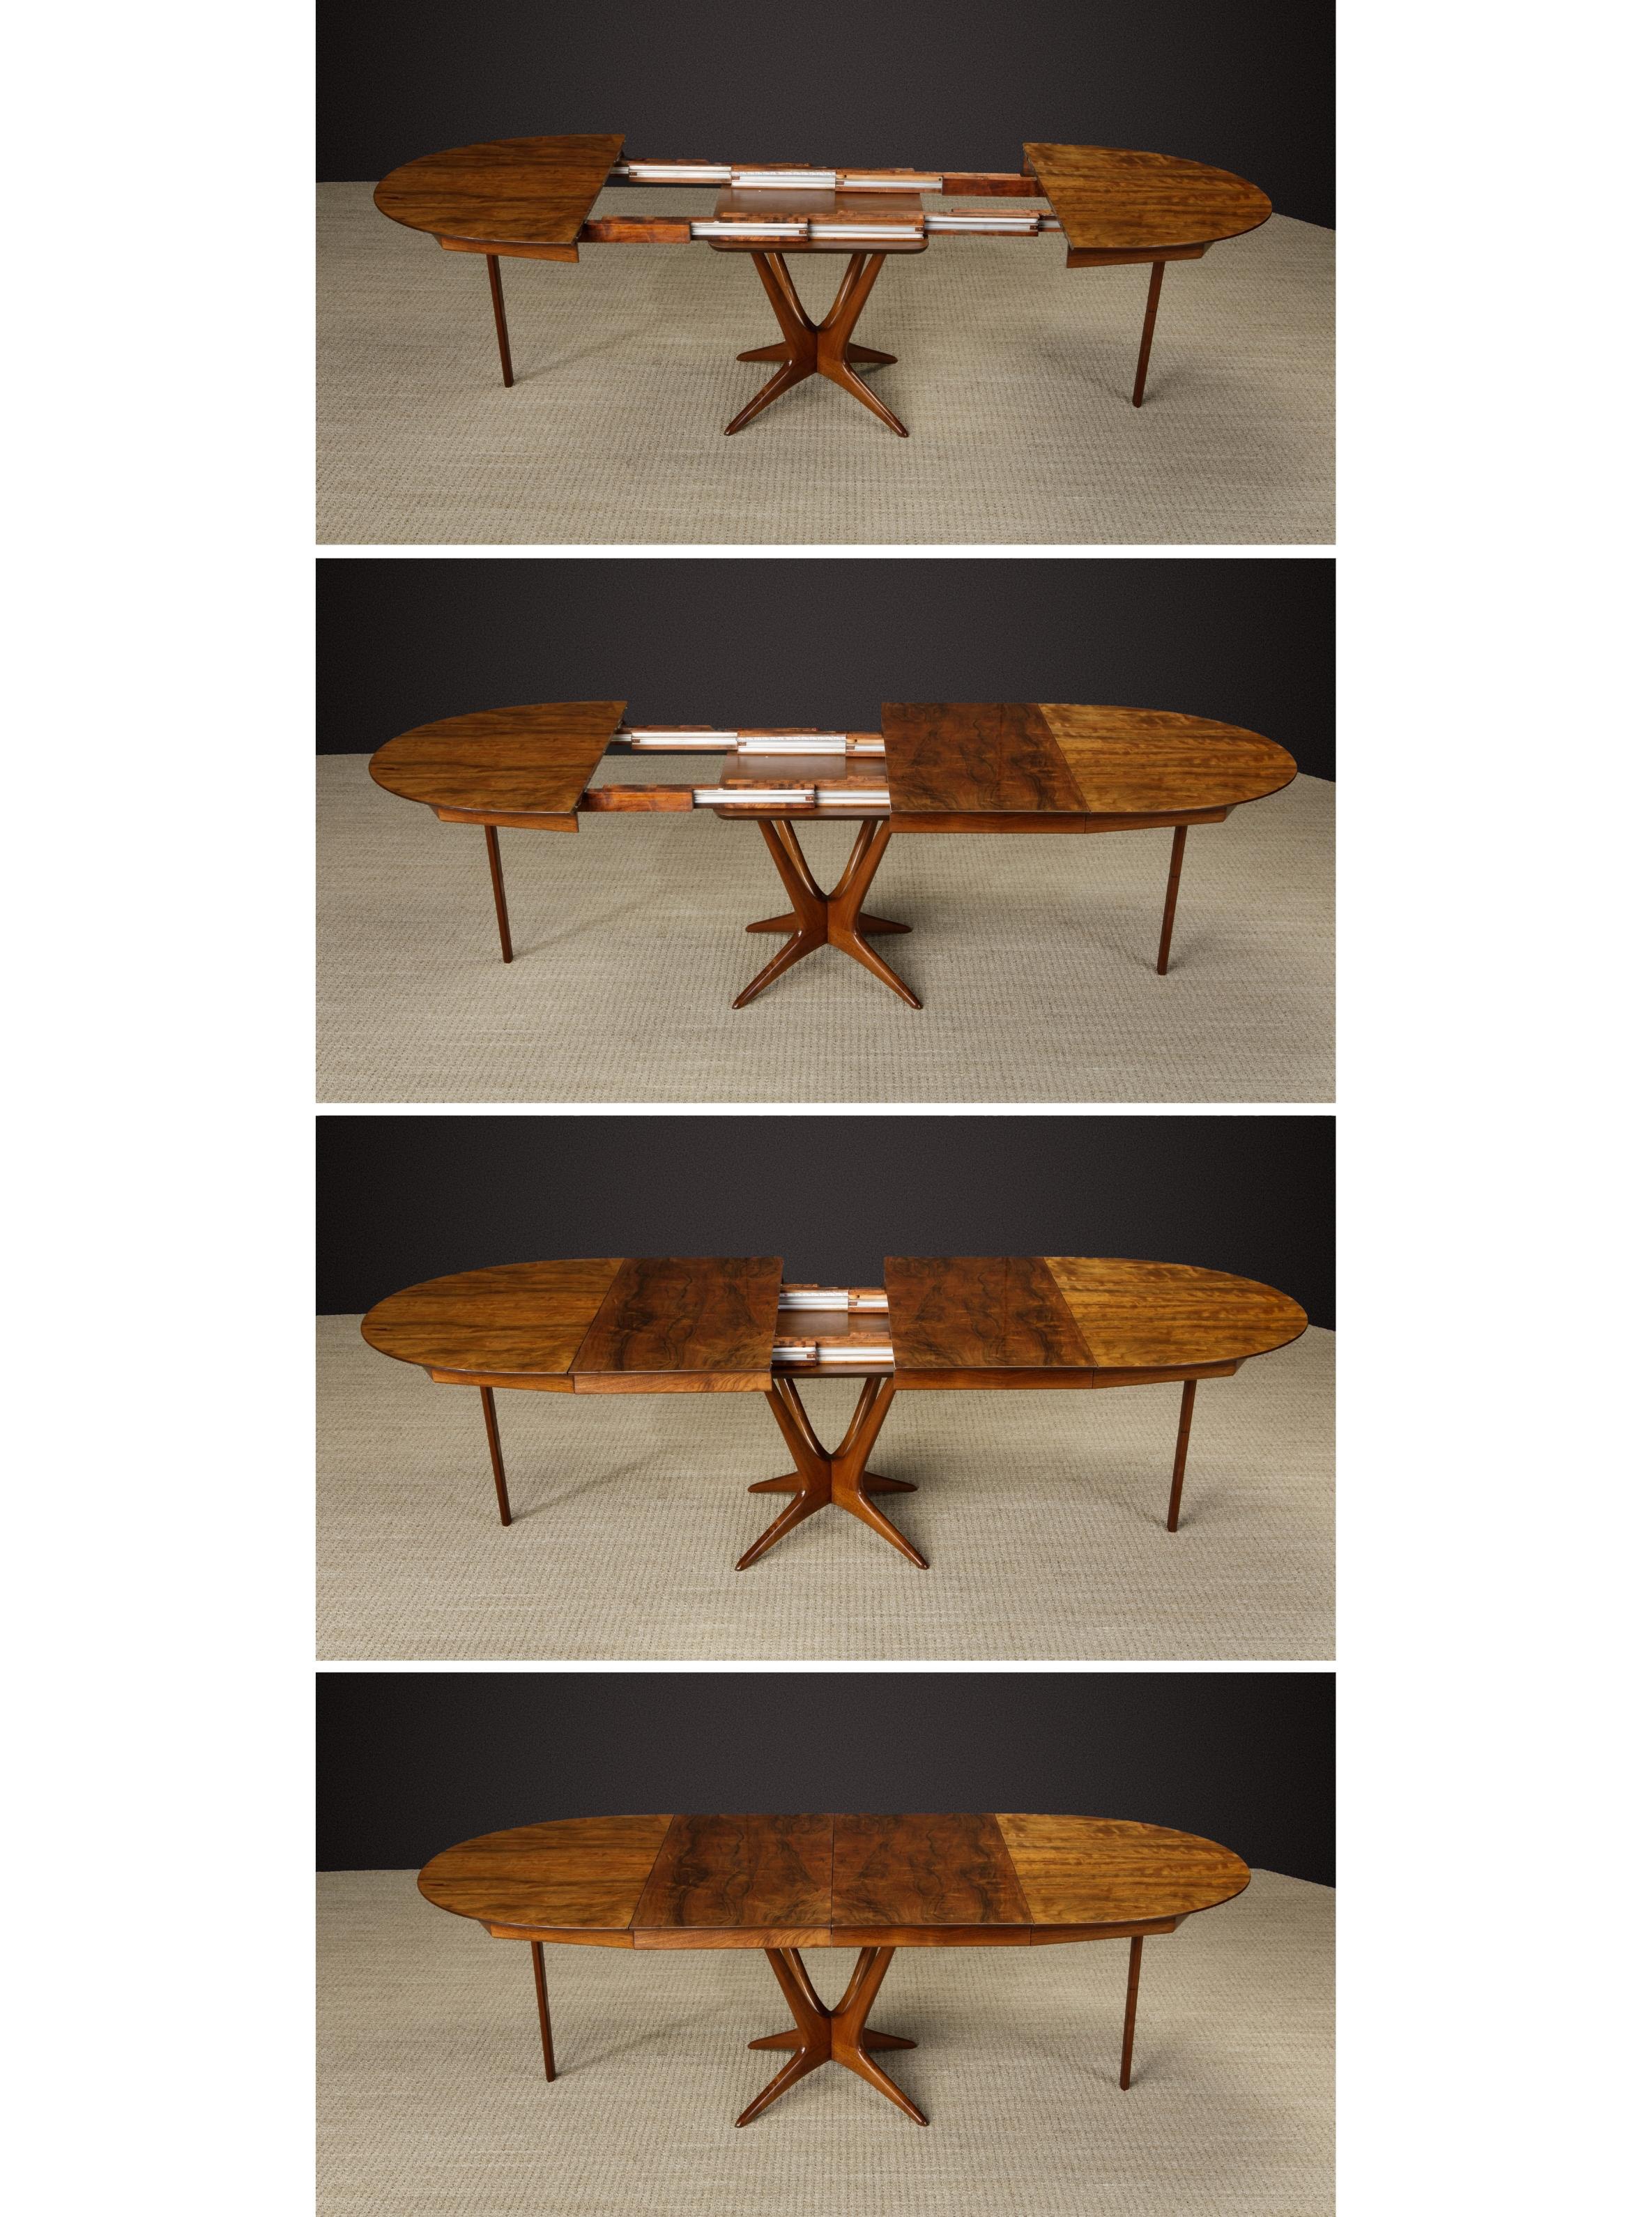 American Important Model #2060 Table by Vladimir Kagan for Kagan-Dreyfuss, 1950s, Signed